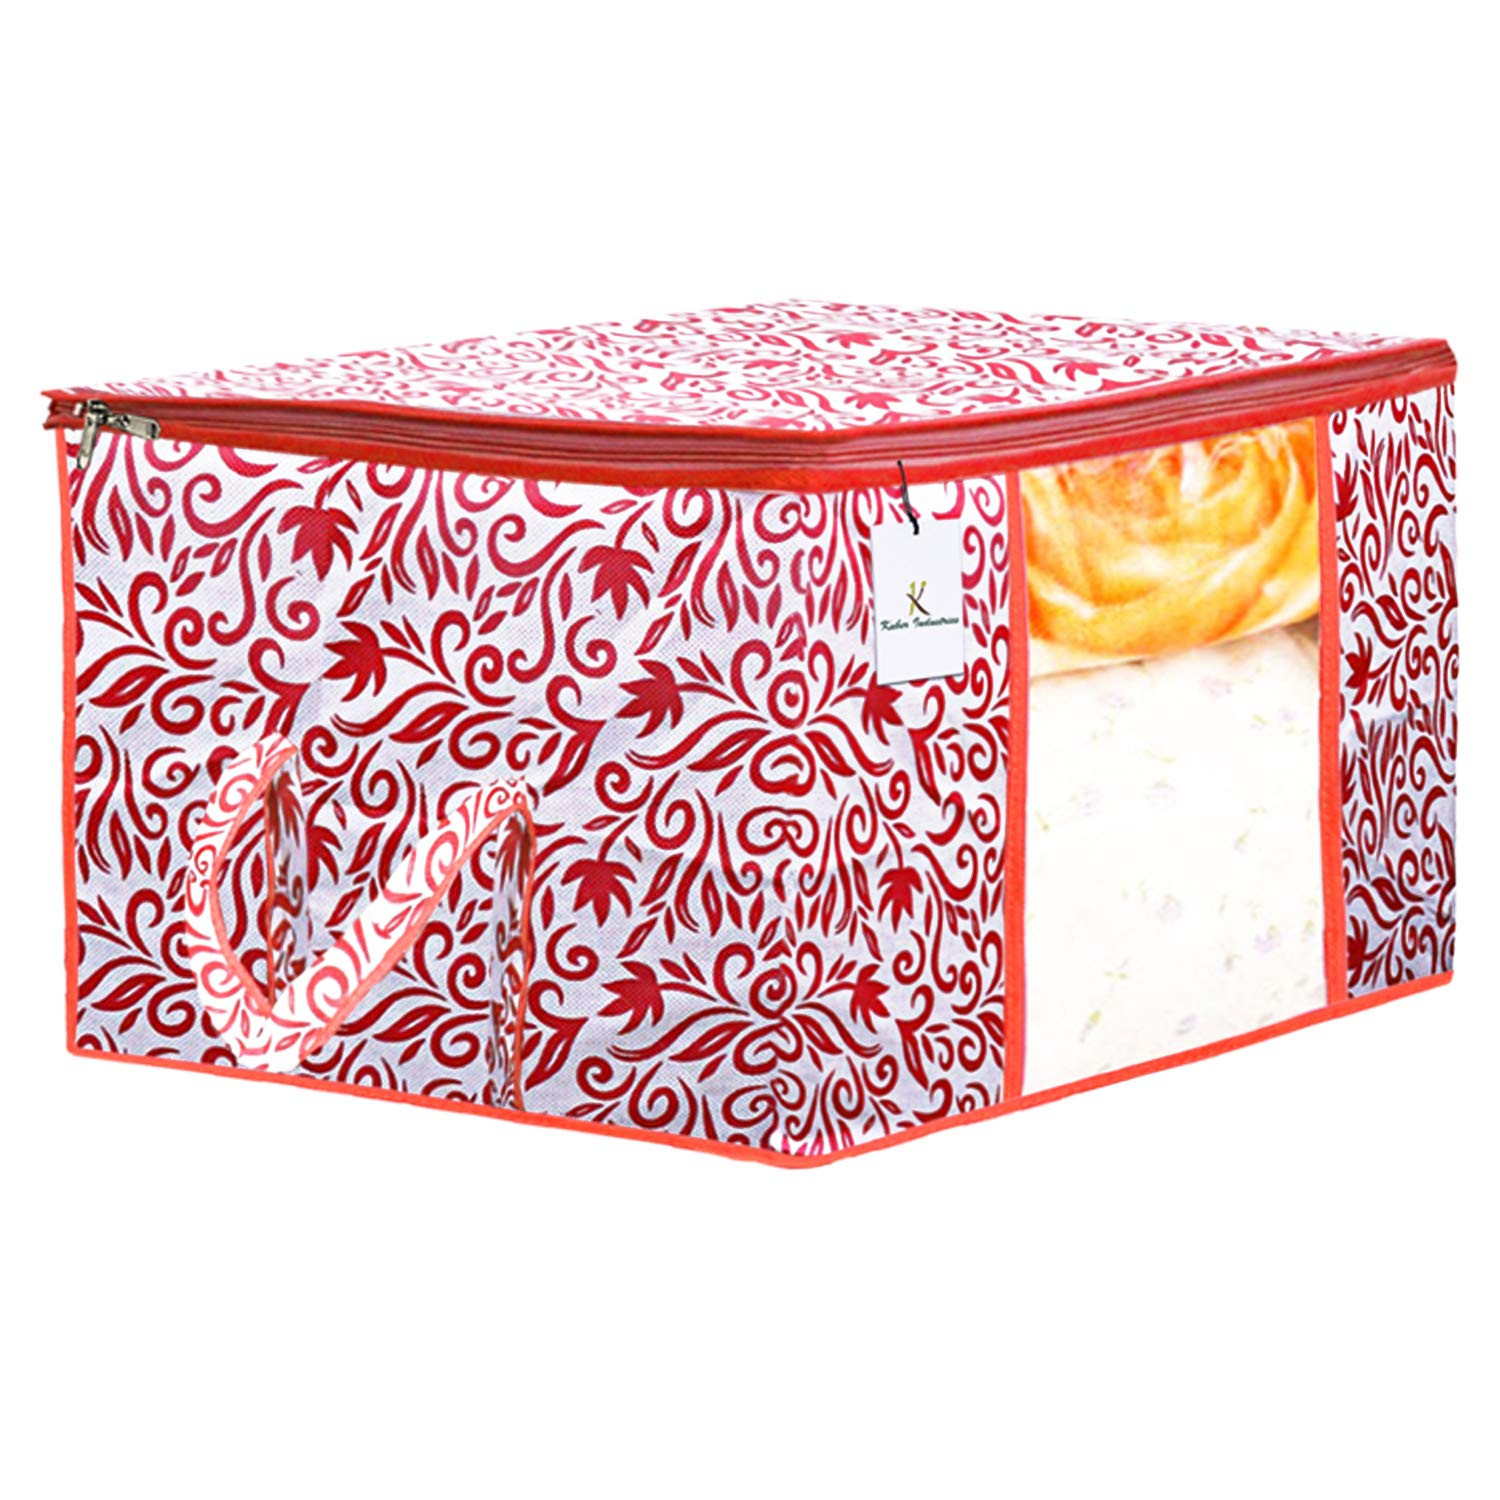 Kuber Industries Leaf Design Non Woven Fabric Underbed Storage Bag,Cloth Organiser,Blanket Cover with Transparent Window, Red & Pink -CTKTC41043